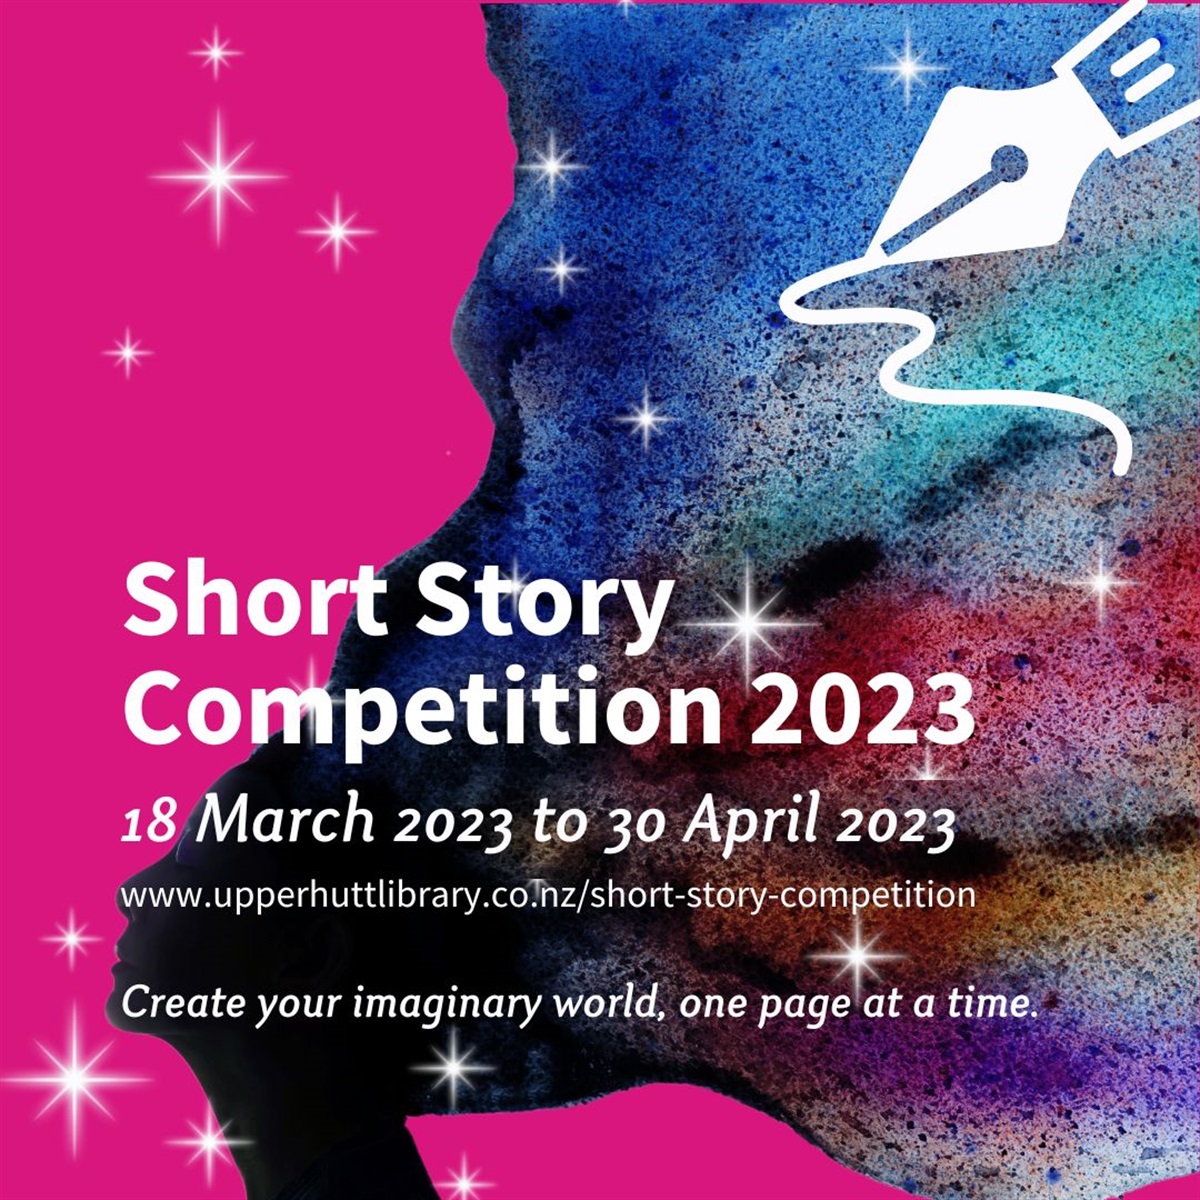 Short Story Competition is back Upper Hutt Libraries